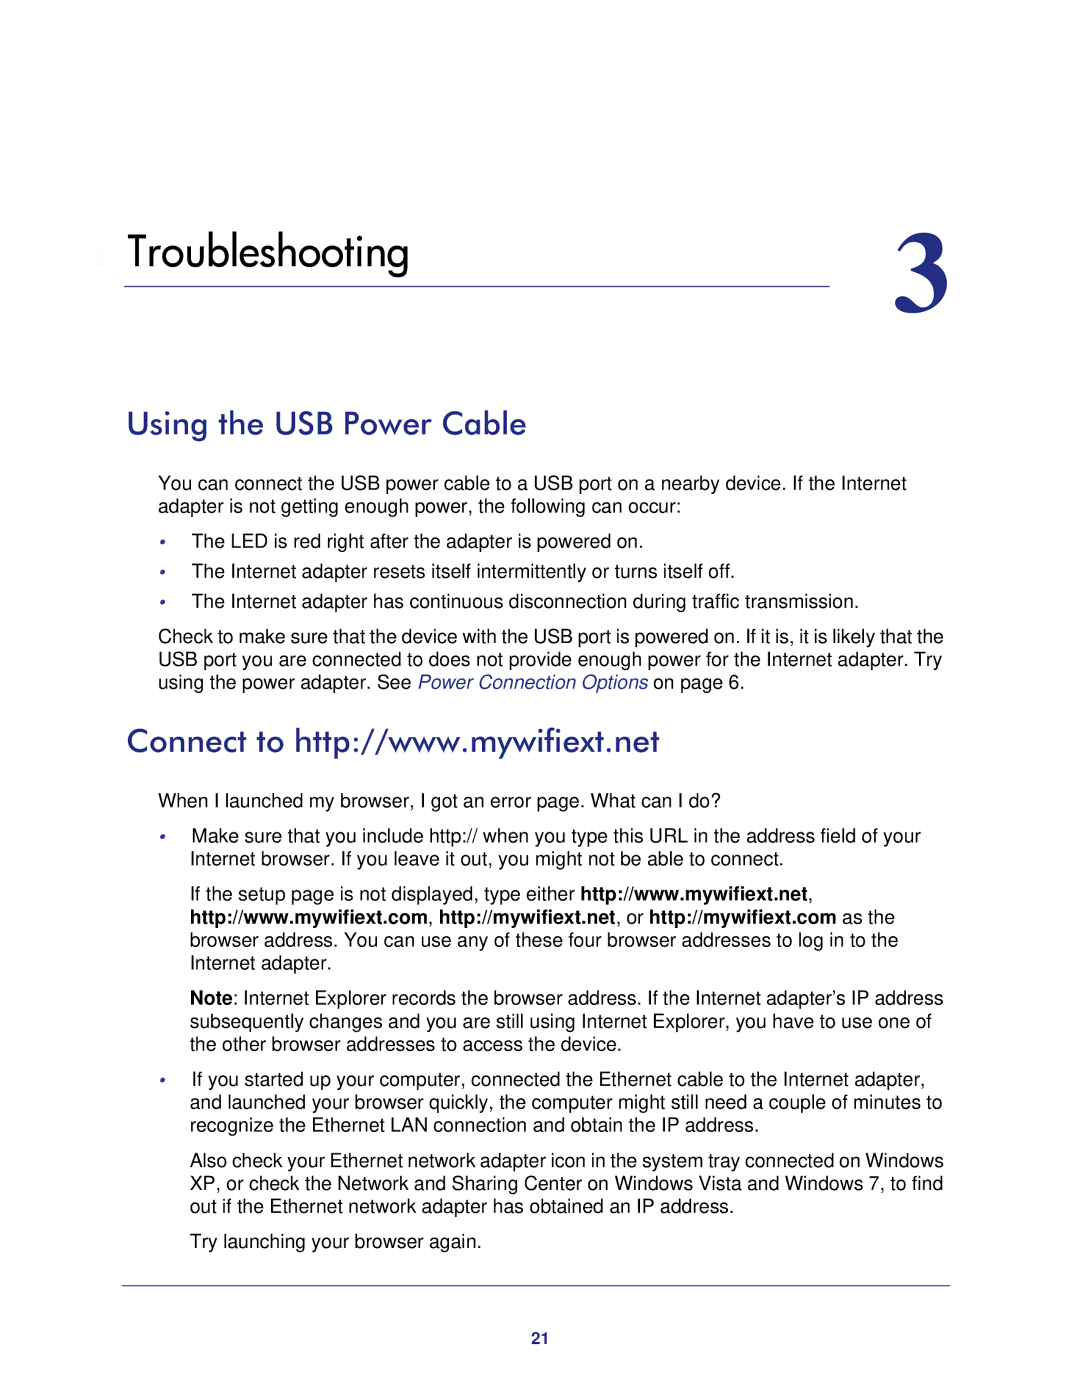 NETGEAR WNCE3001-100NAS user manual Troubleshooting, Using the USB Power Cable 